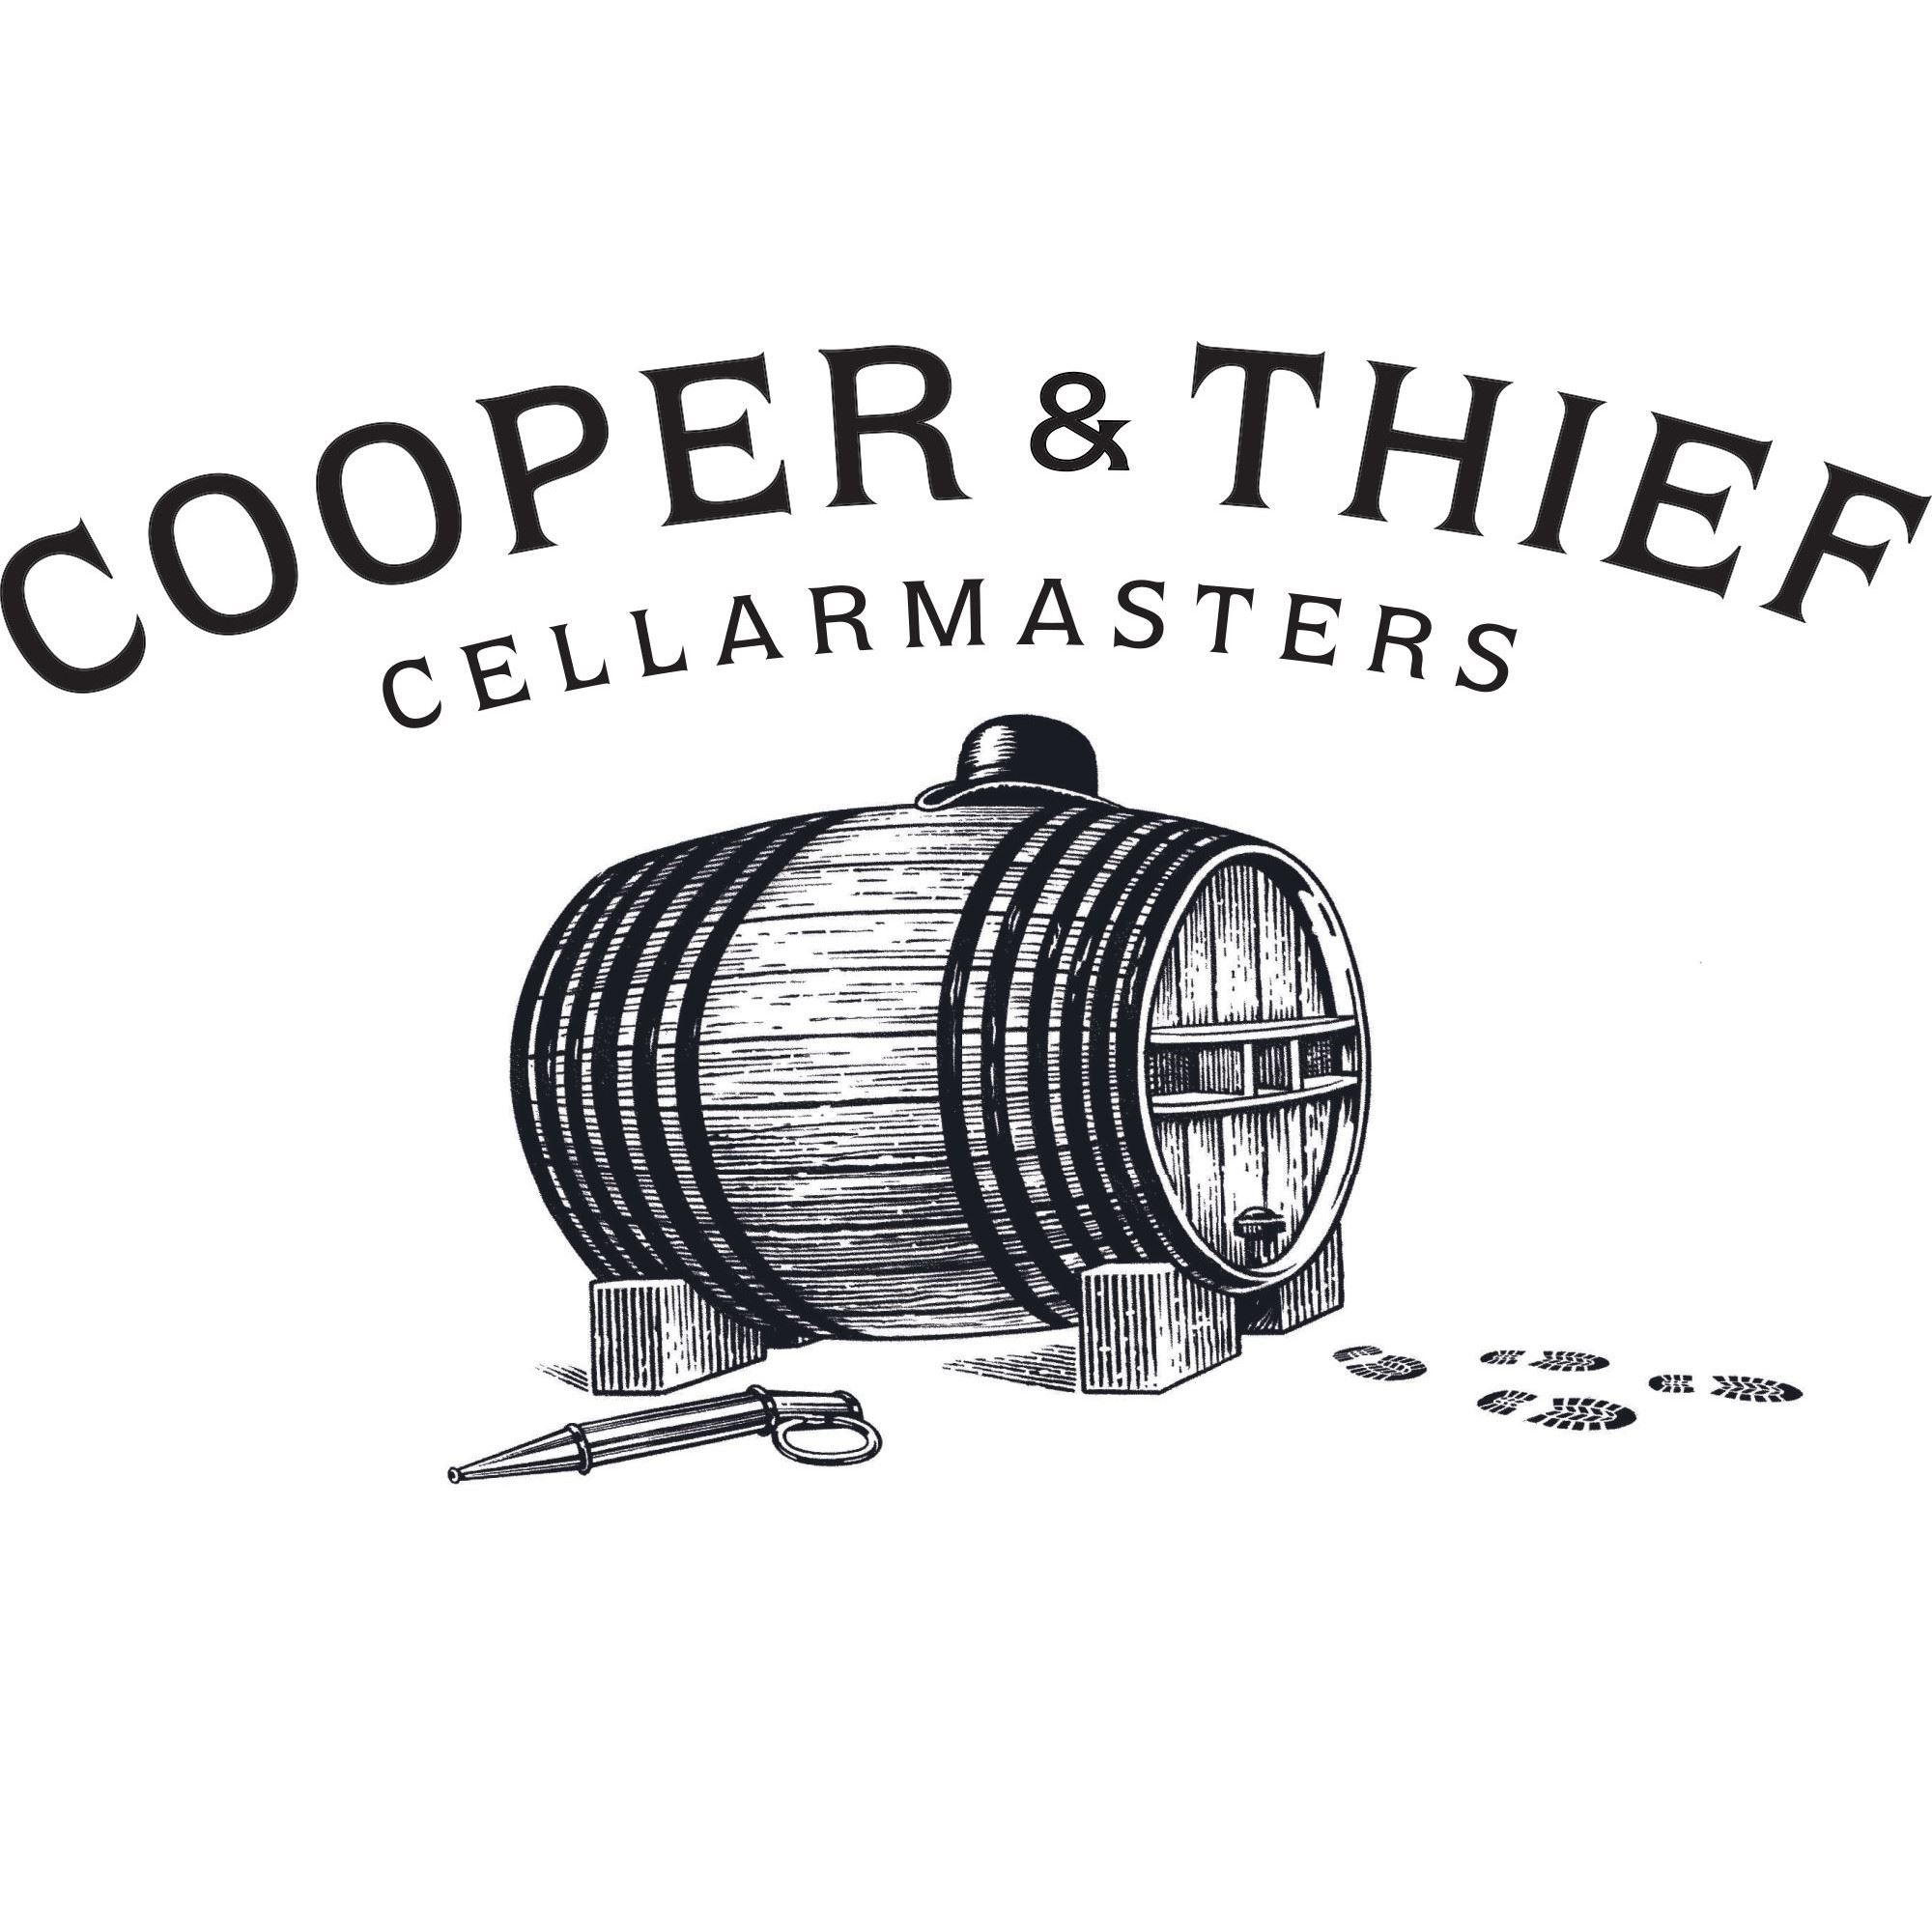 who makes cooper and thief wine